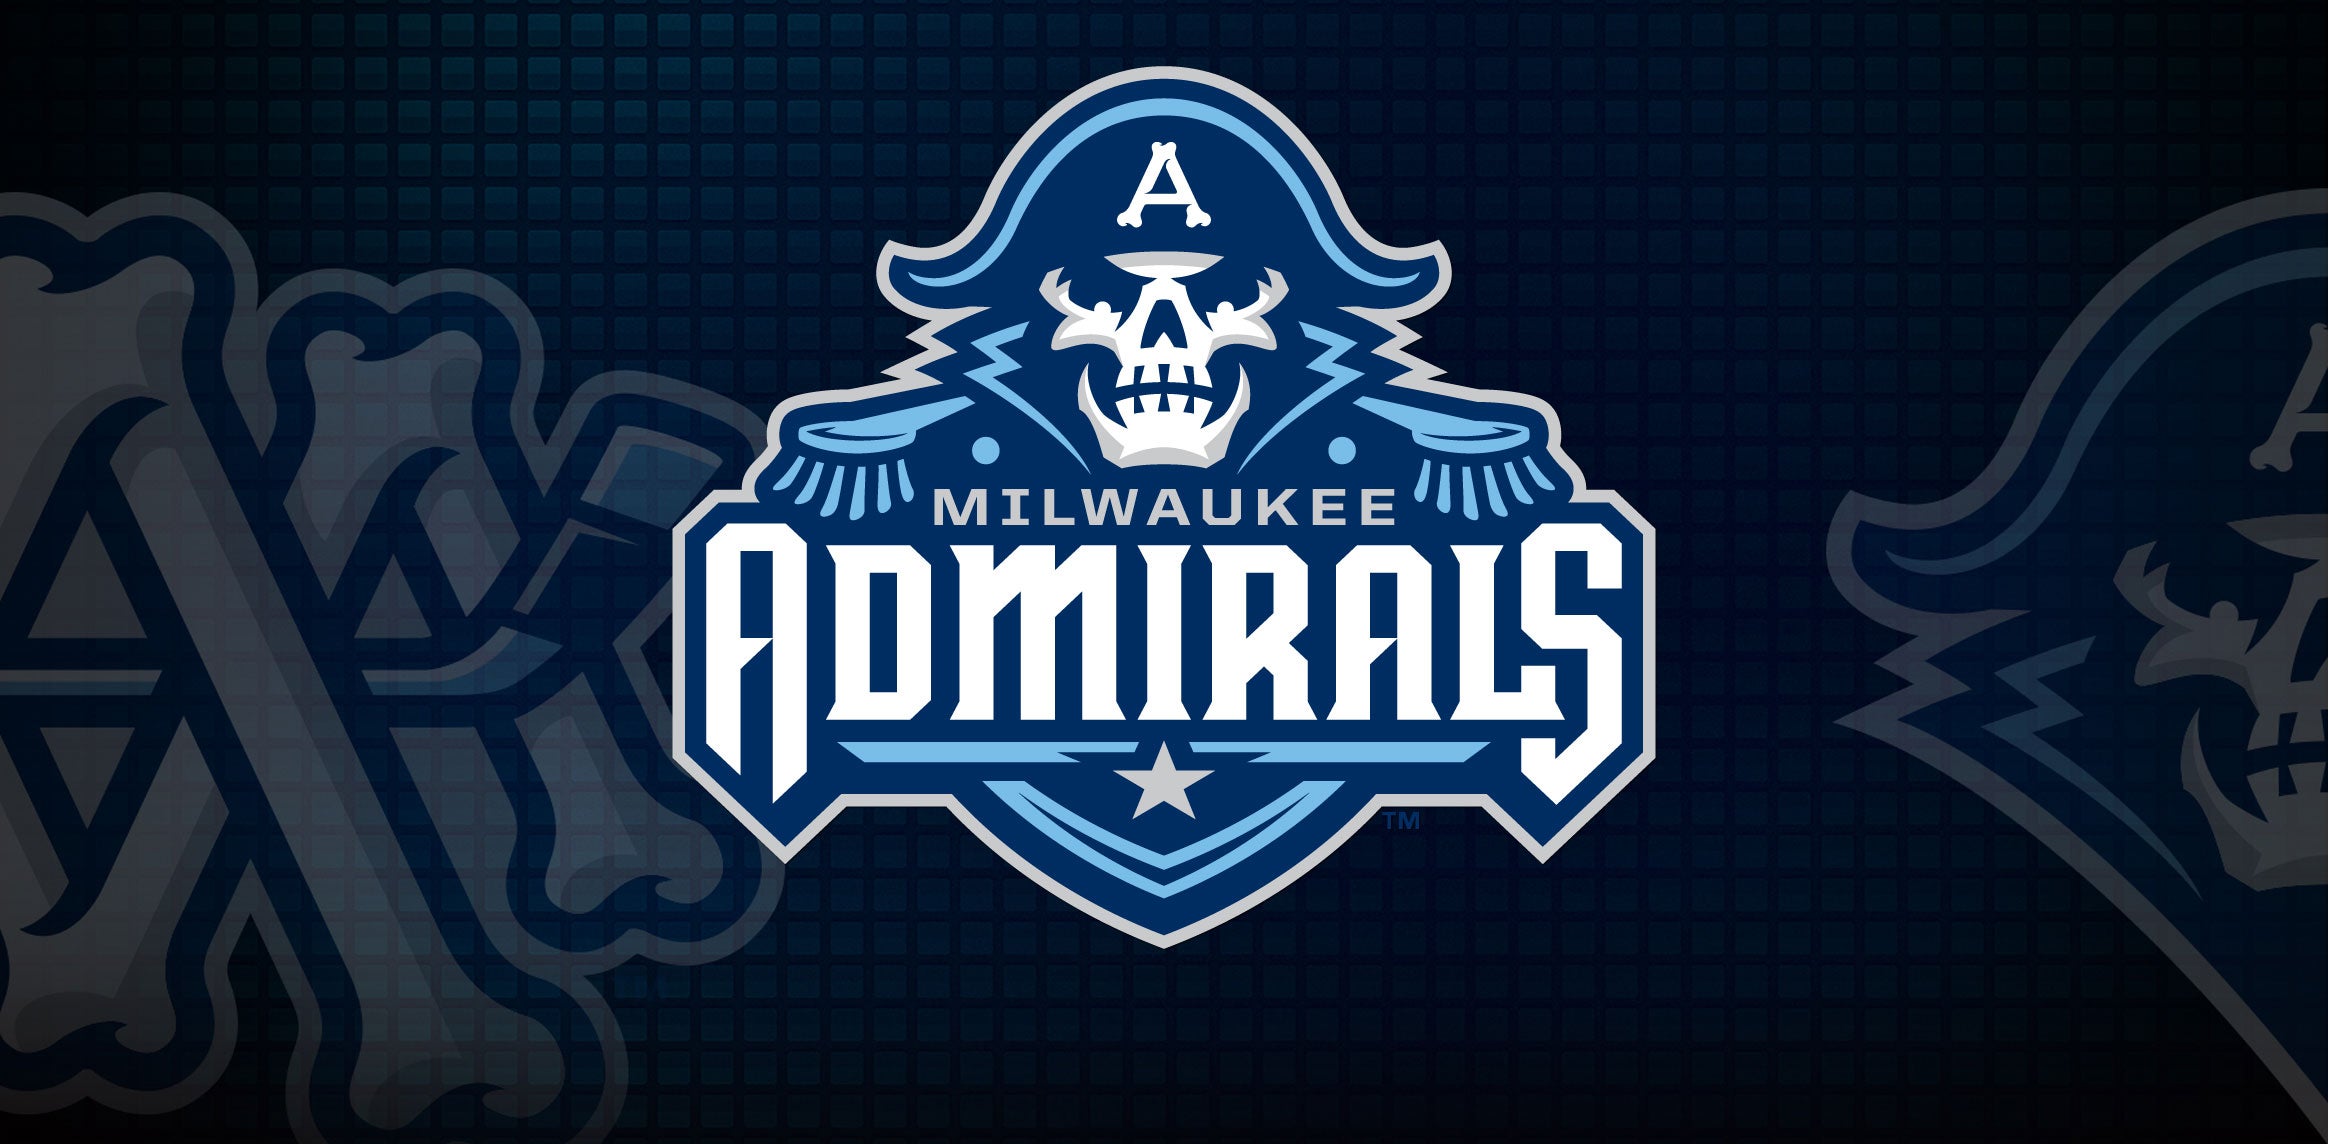 Milwaukee Admirals Minor League Fan Apparel and Souvenirs for